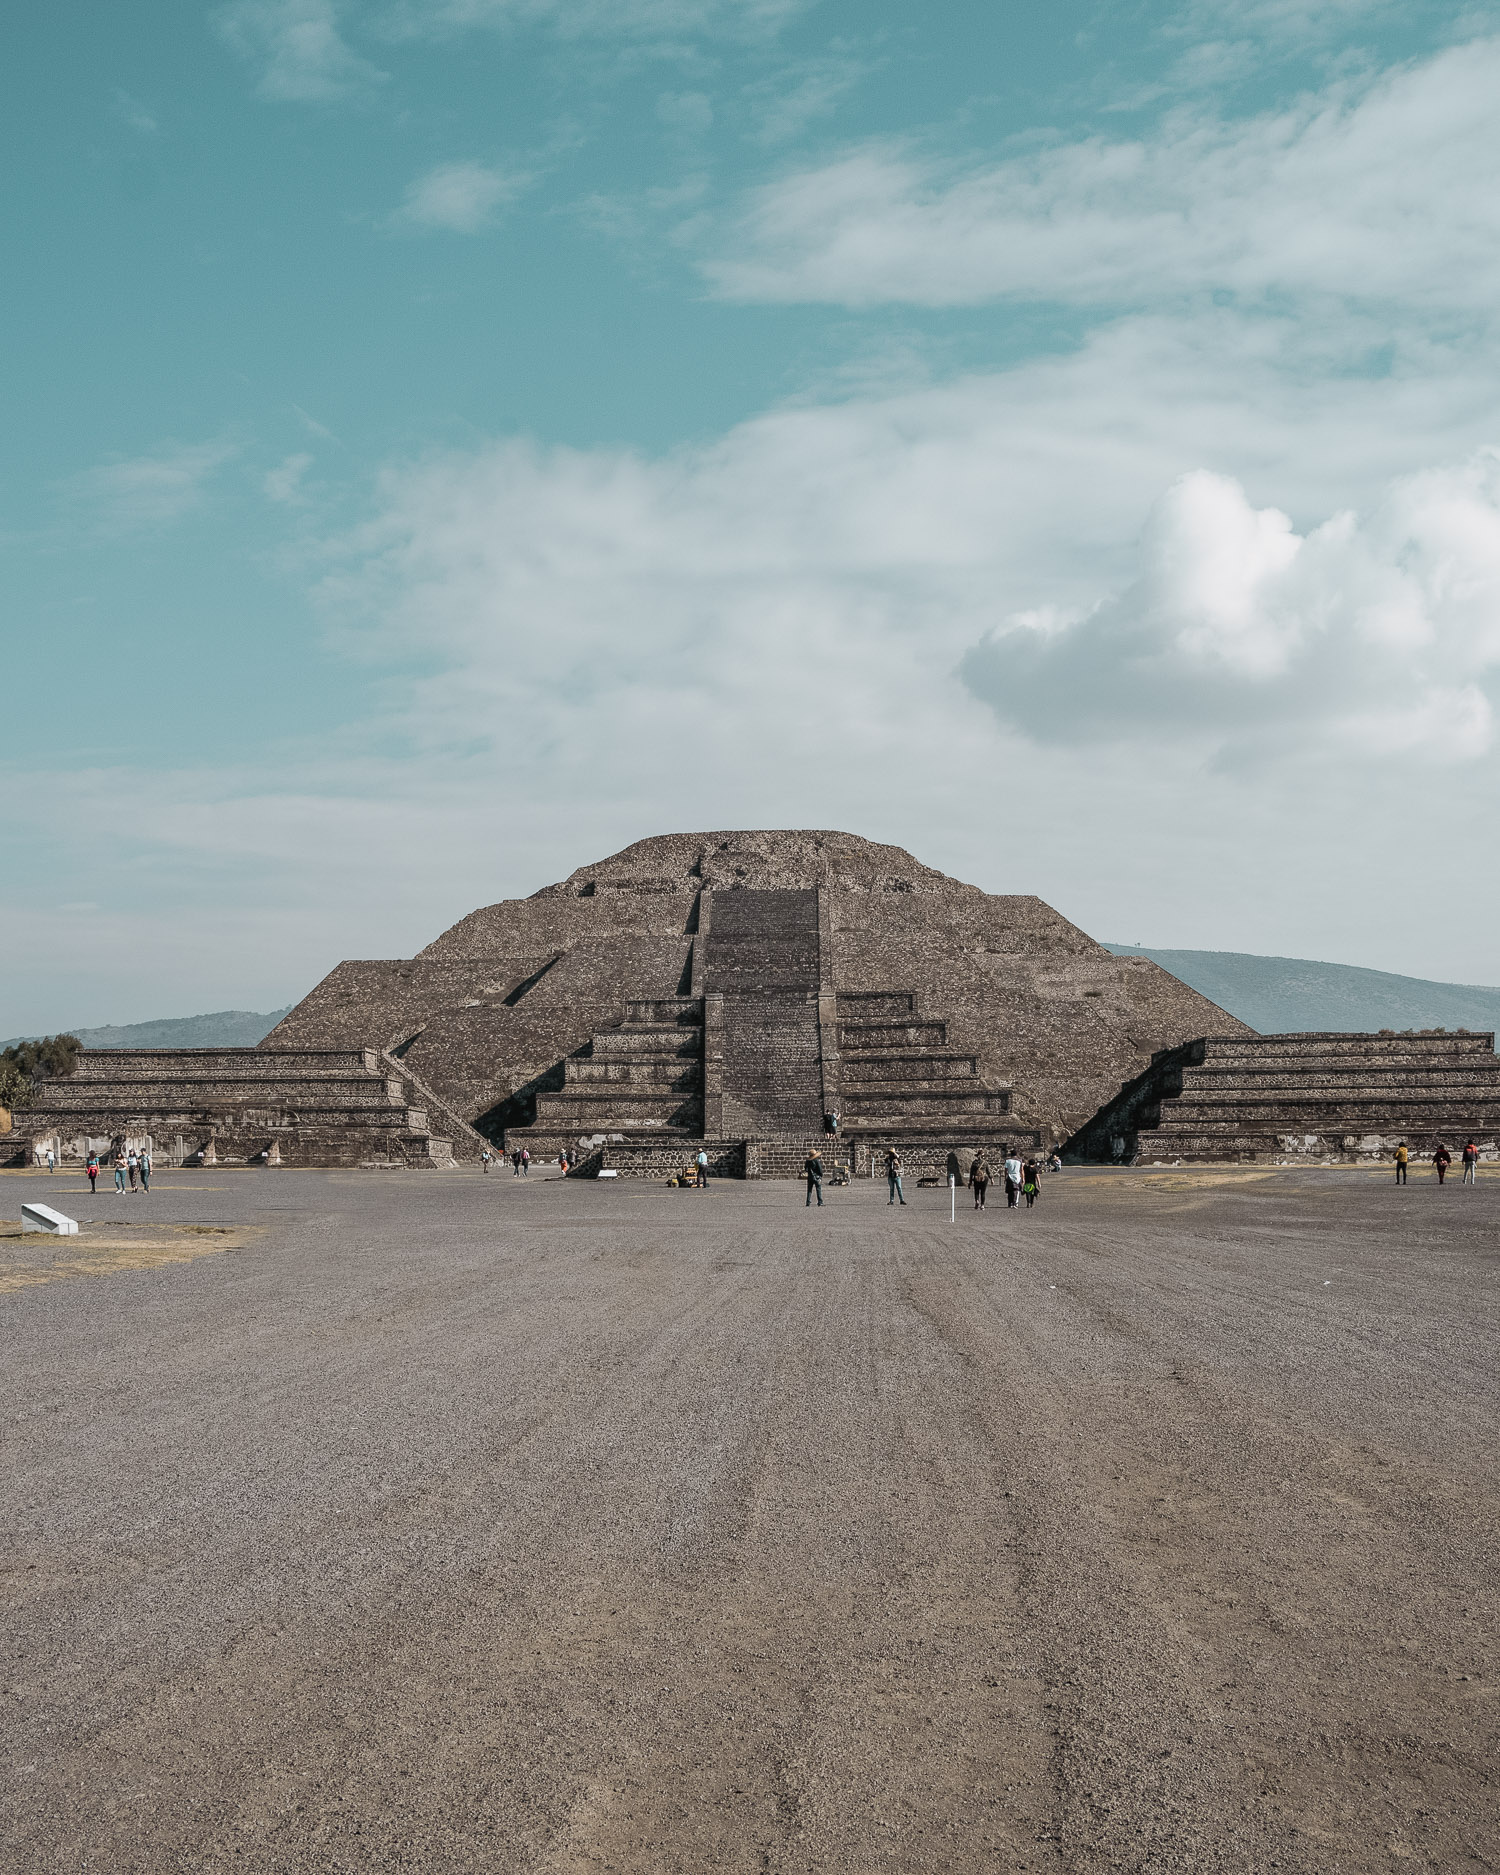 The Pyramids of Teotihuacan, a must-see around Mexico City